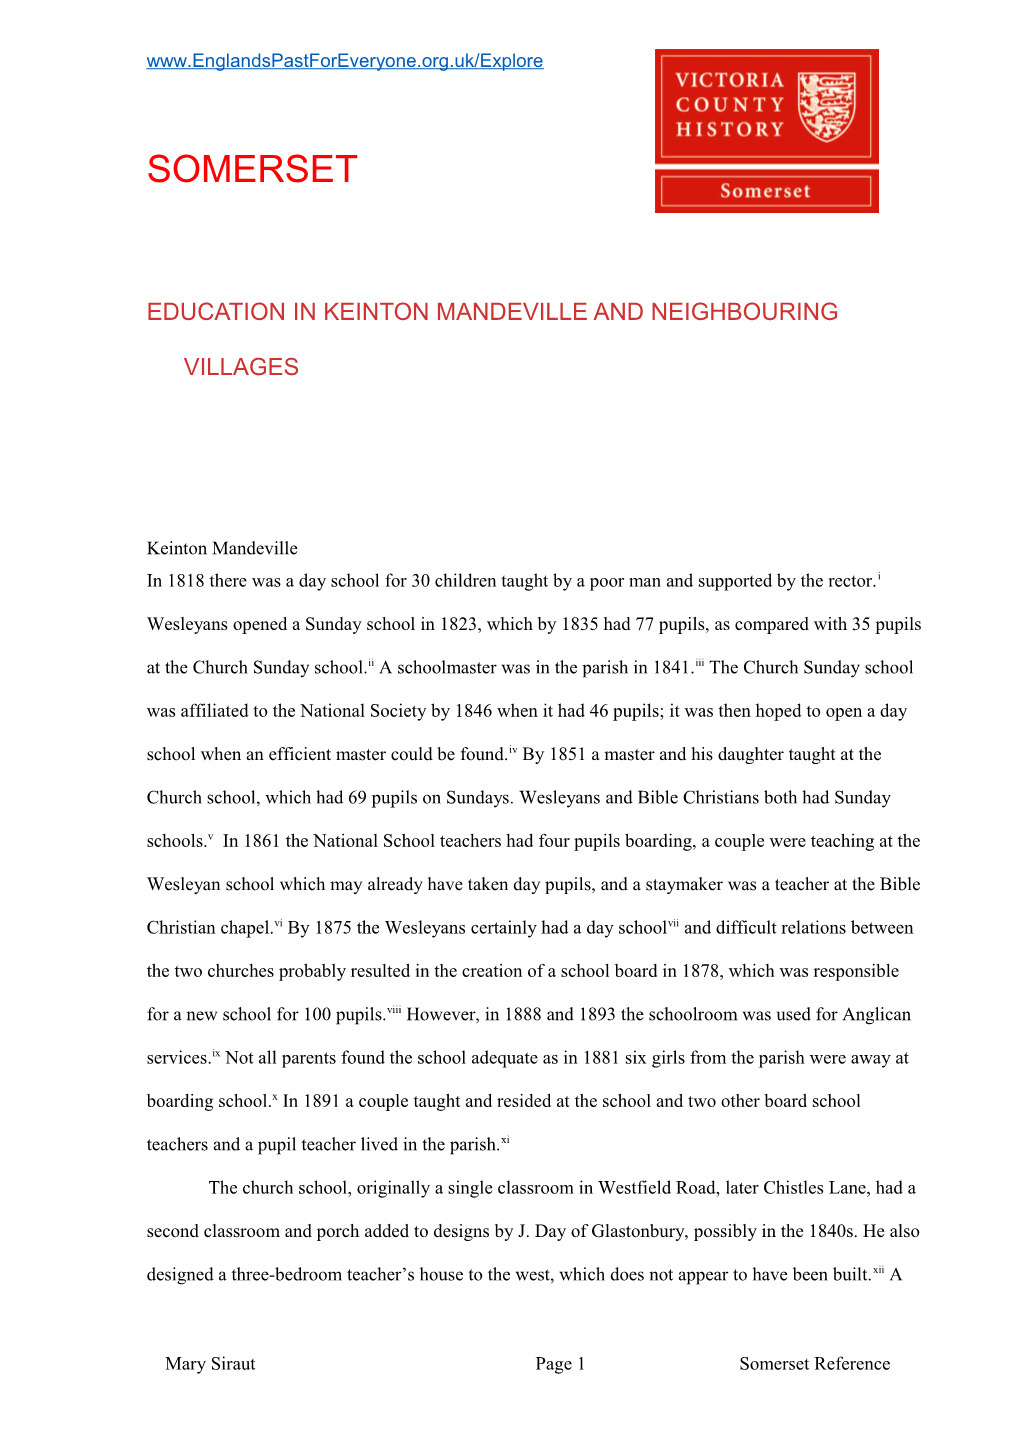 Education in Keinton Mandeville and Neighbouring Villages